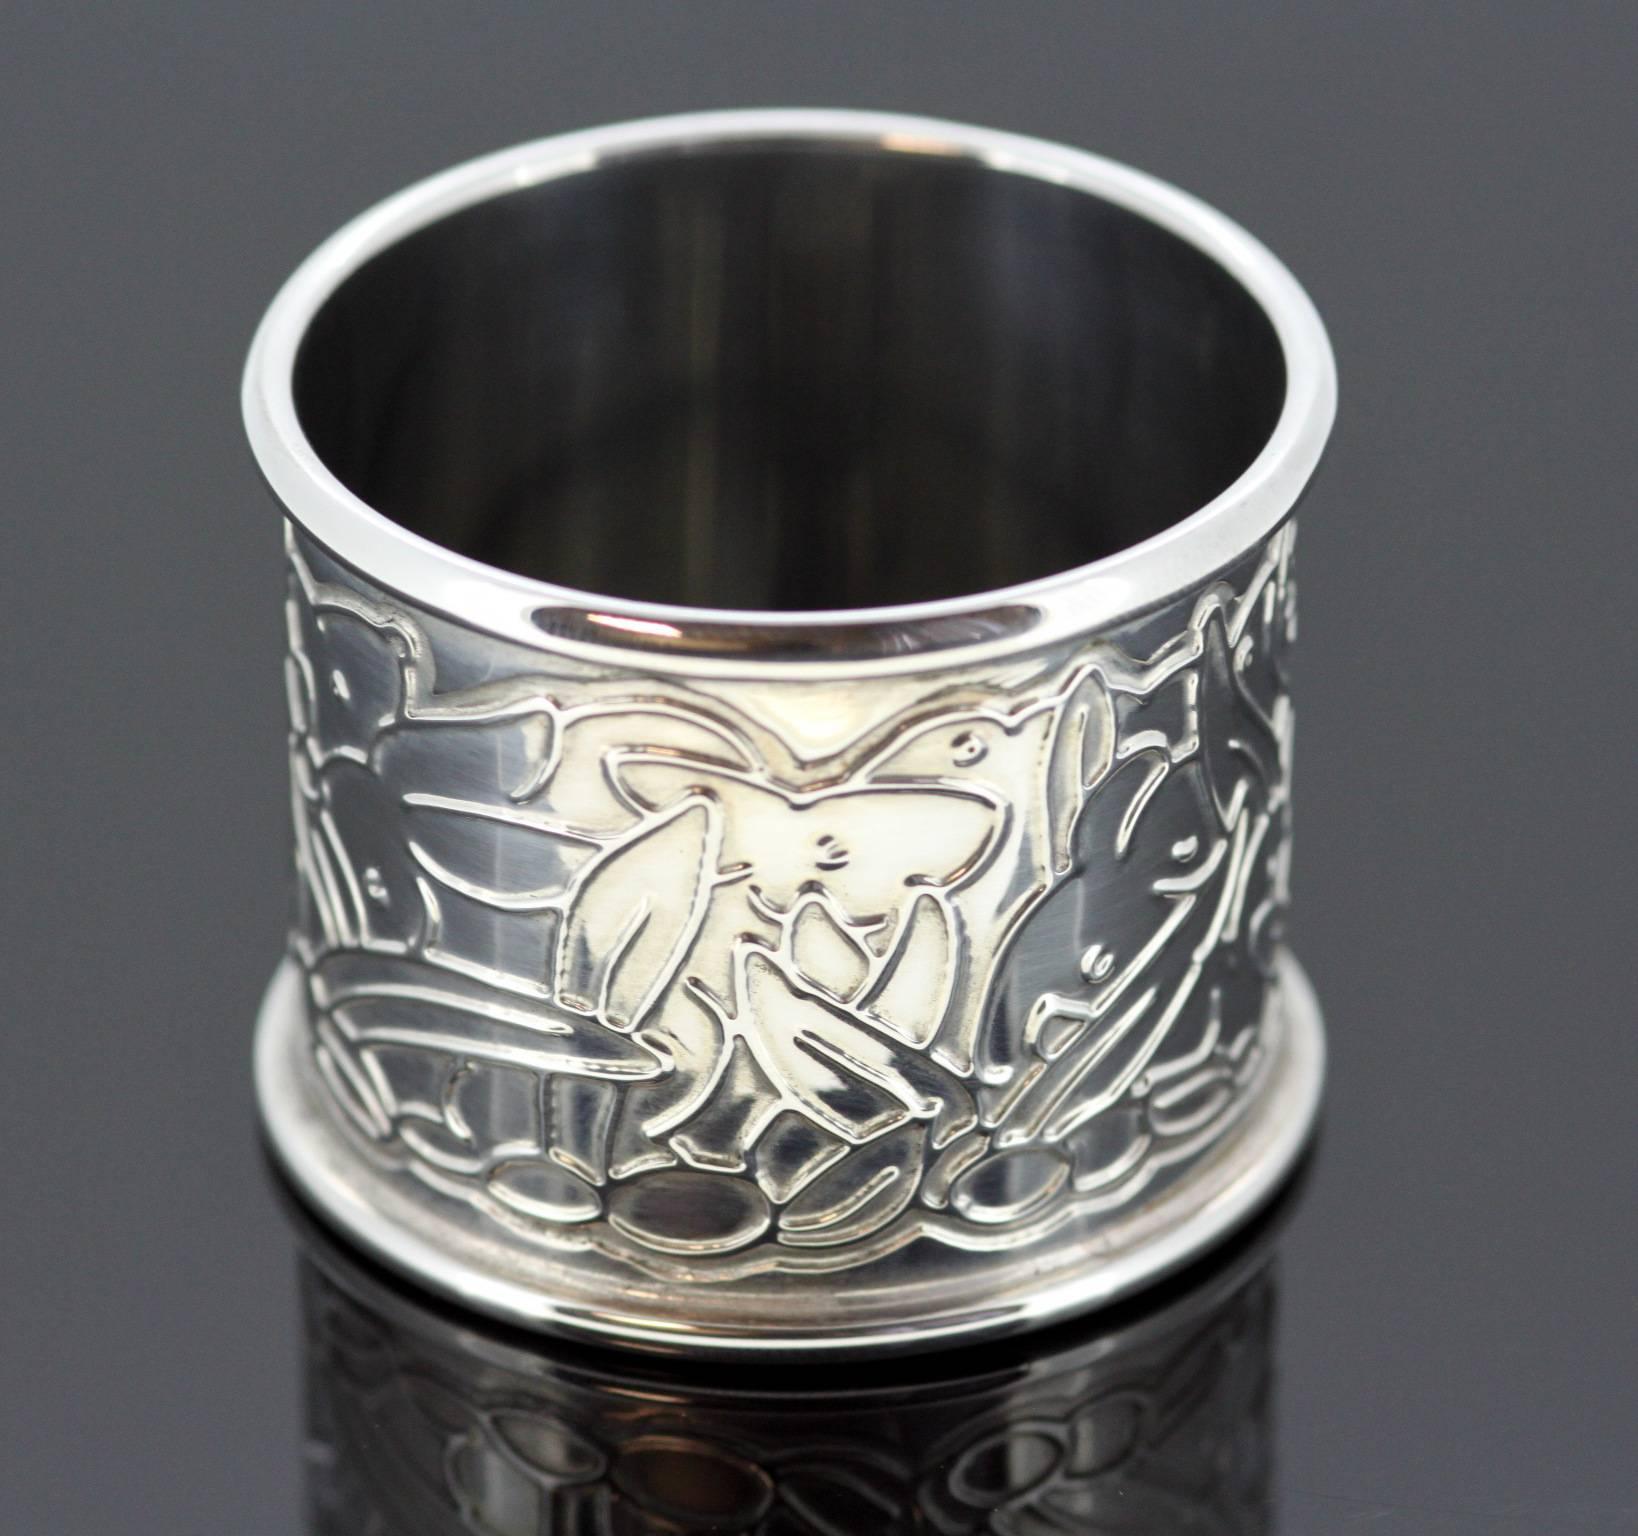 Sterling silver napkin ring
Maker: Asprey London
Made in London 2003
Fully hallmarked.

Dimensions: 
Diameter x Height 5.2 x 4.1 cm
Total Weight 56 grams

Condition: Minor surface wear from general usage, otherwise excellent and pleasant